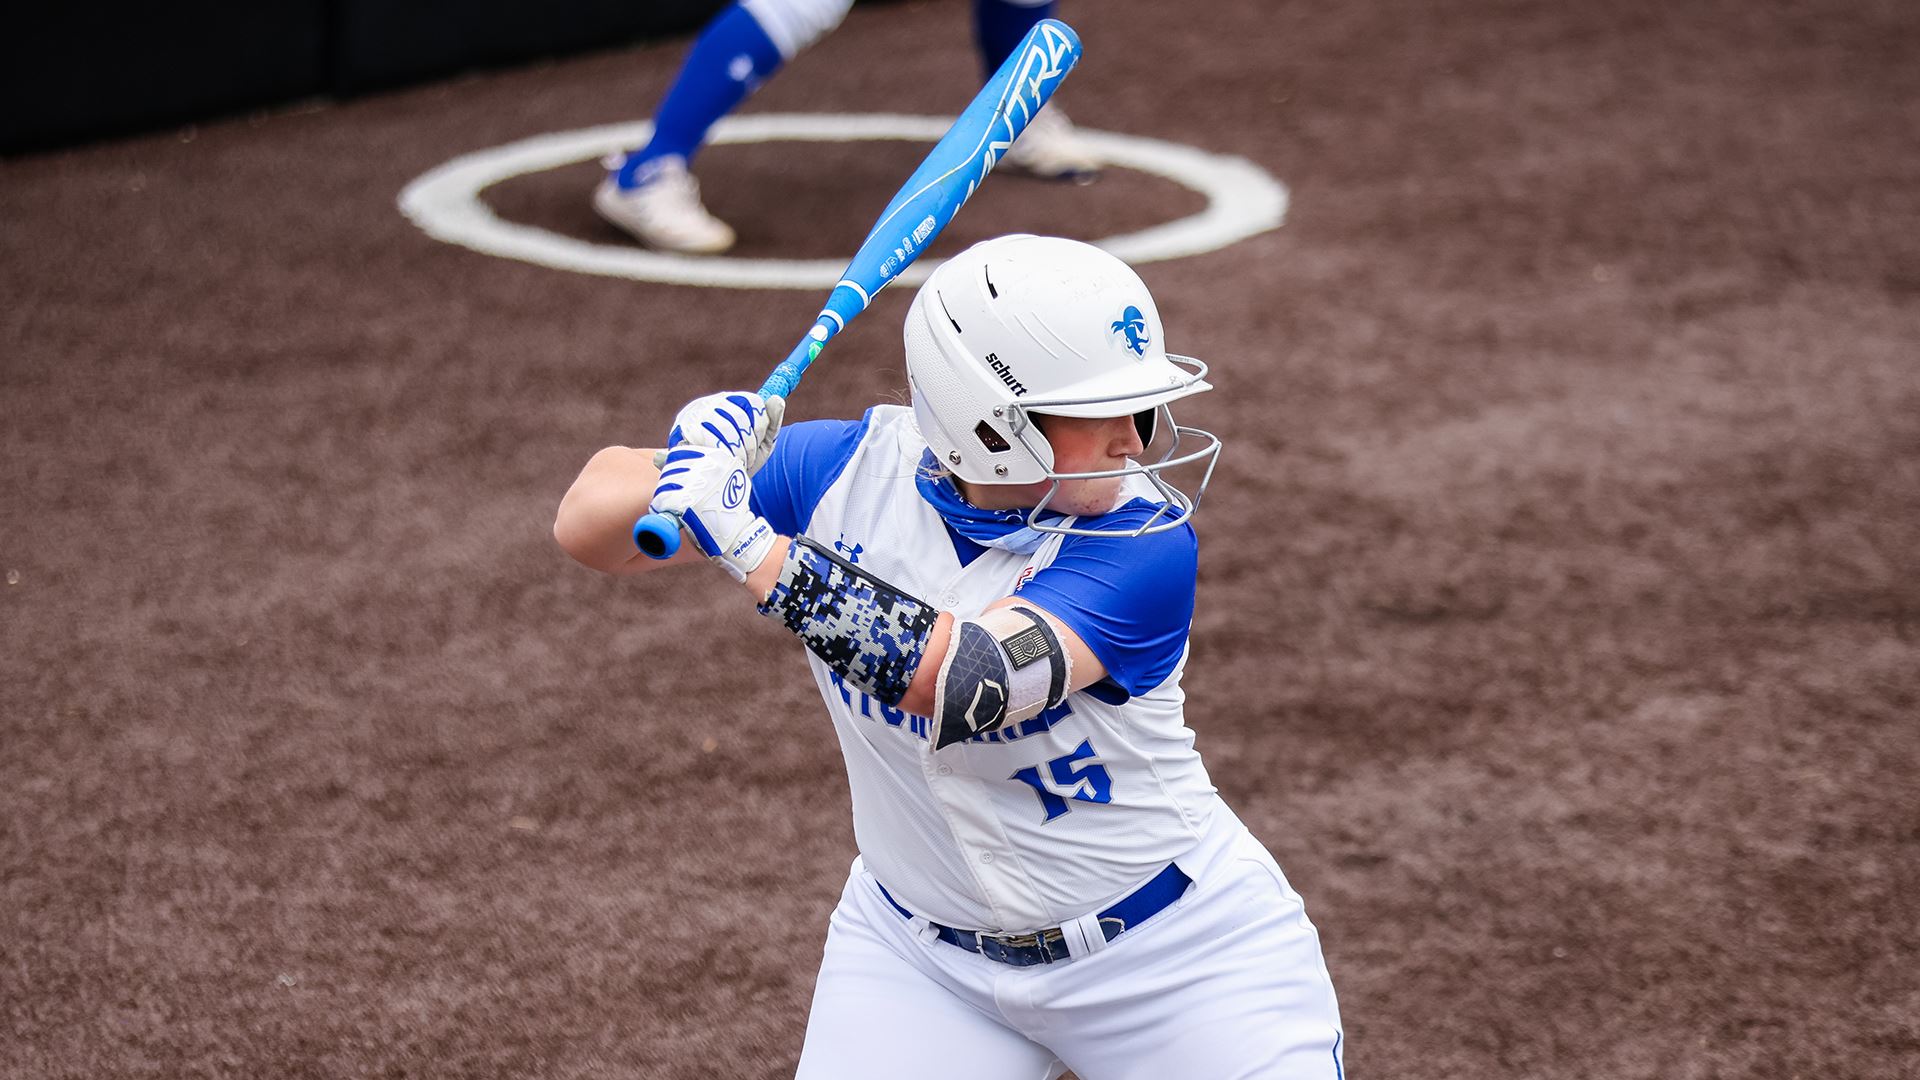 A Seton Hall softball player stands in the batter's box during a game.